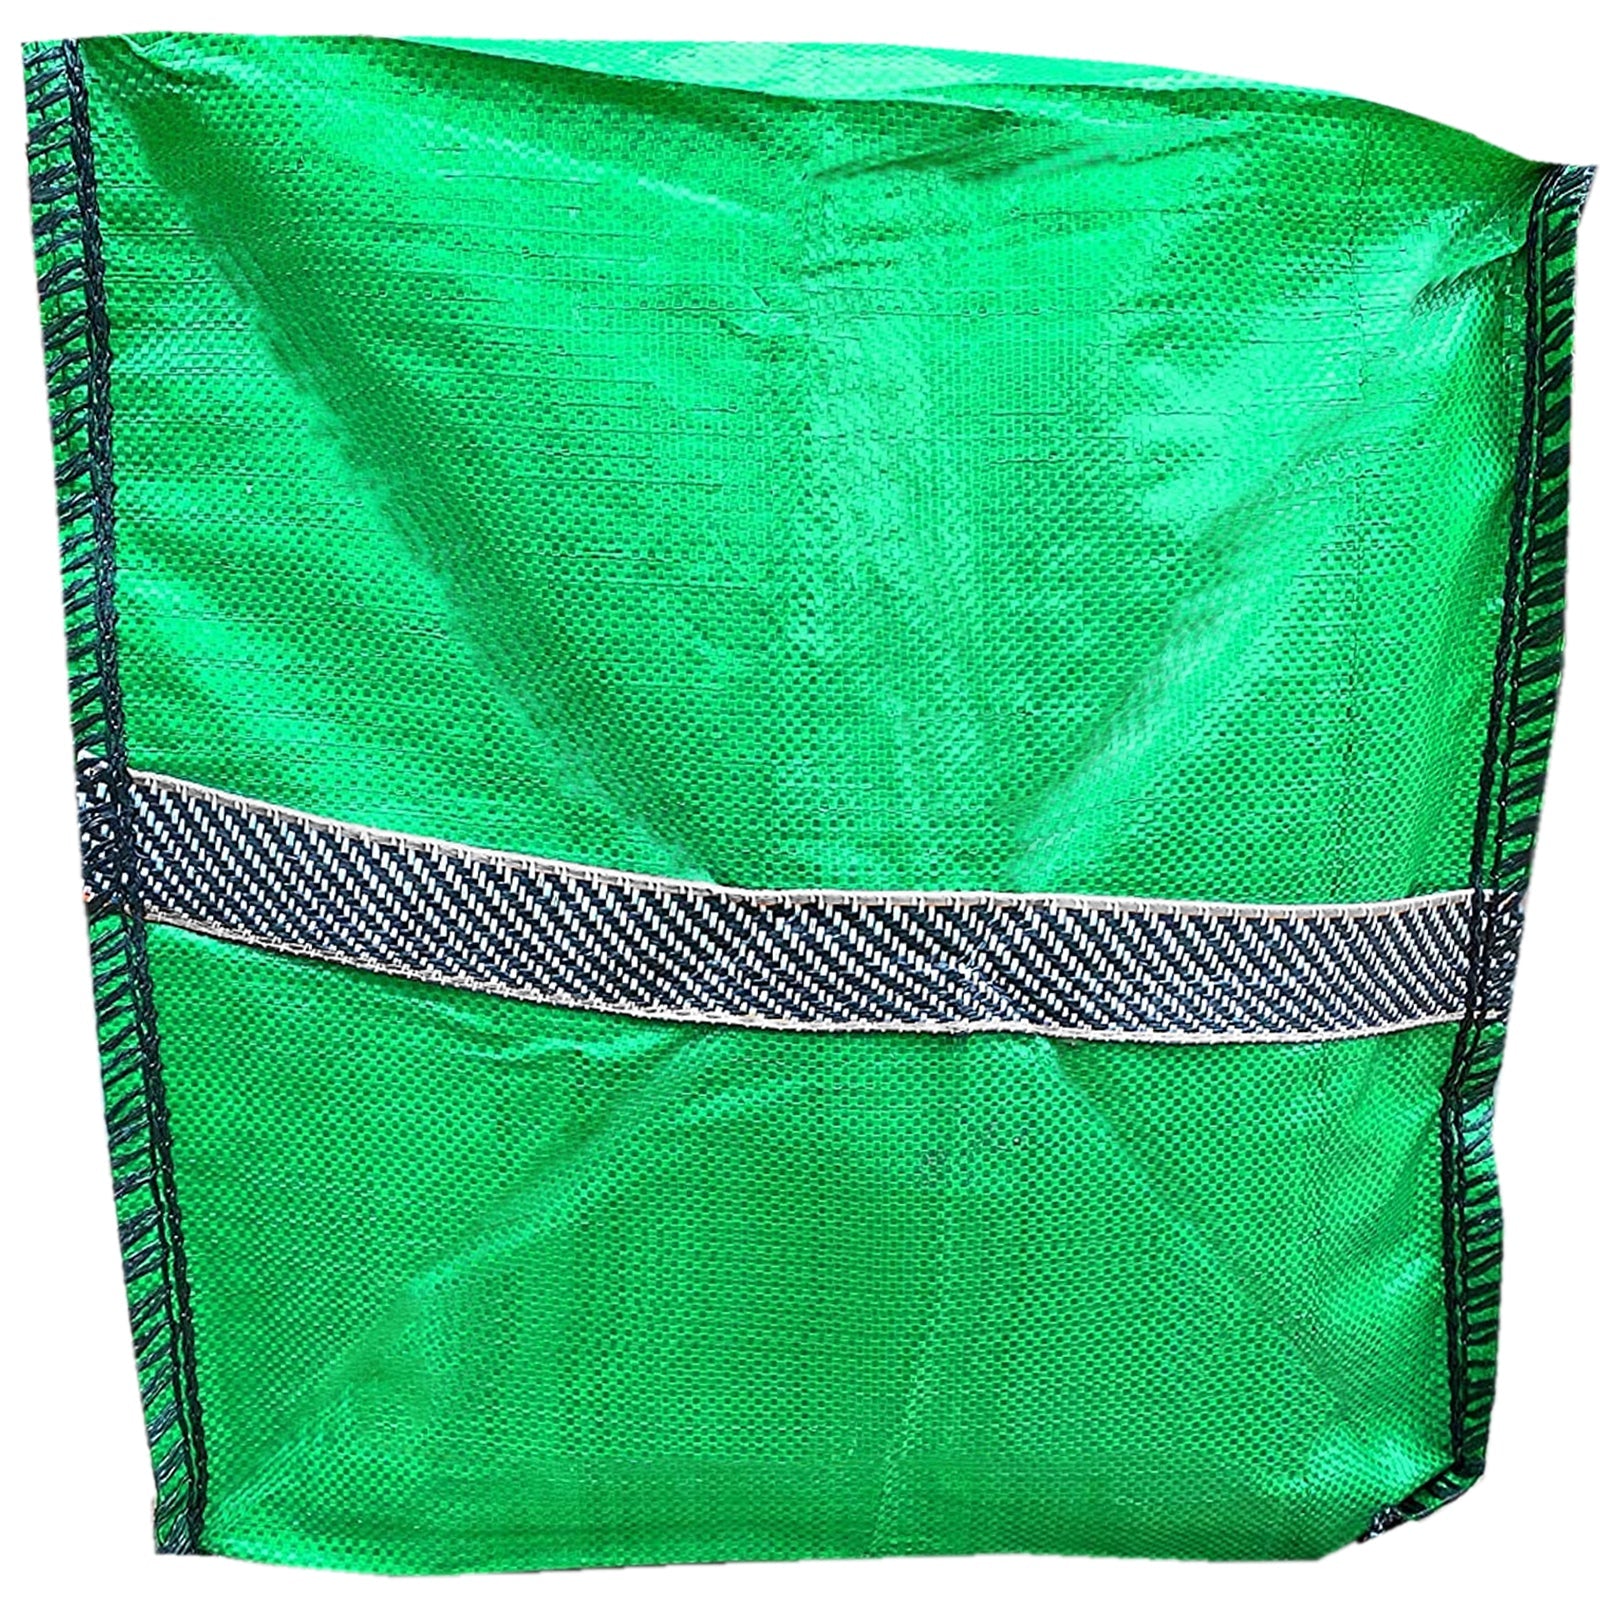 Large Garden Waste Recycling Tip Bags Heavy Duty Non Tear Woven Plastic Sack